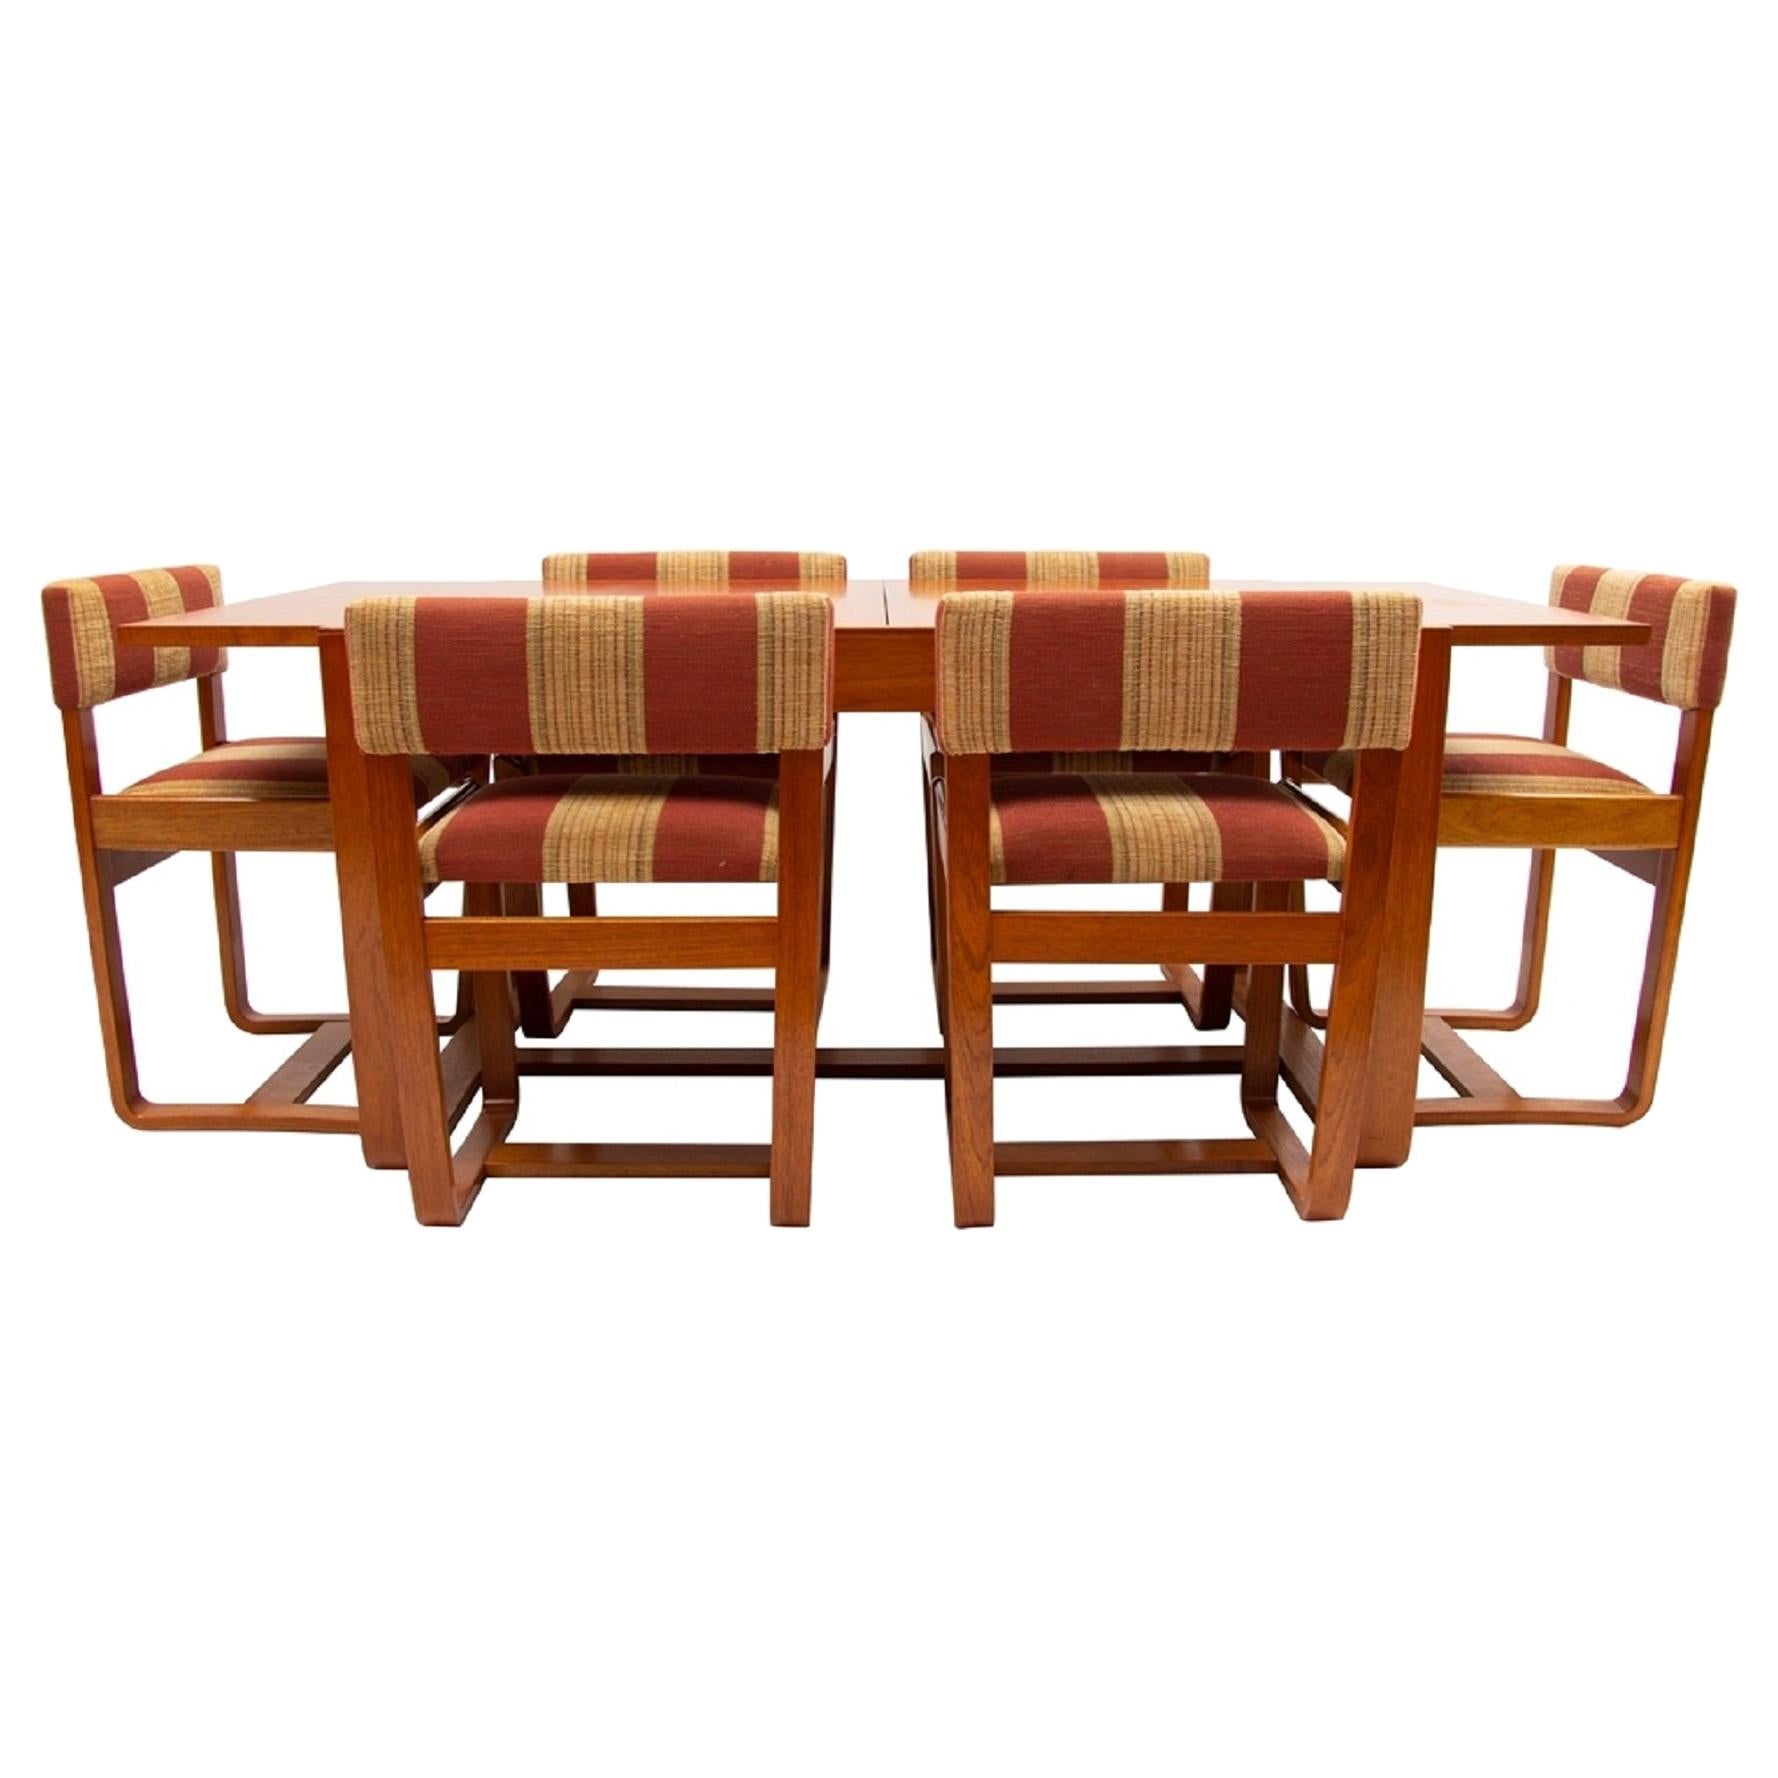 British Midcentury Extending Dining Table & 6 Chairs by Uniflex, c.1960 For Sale